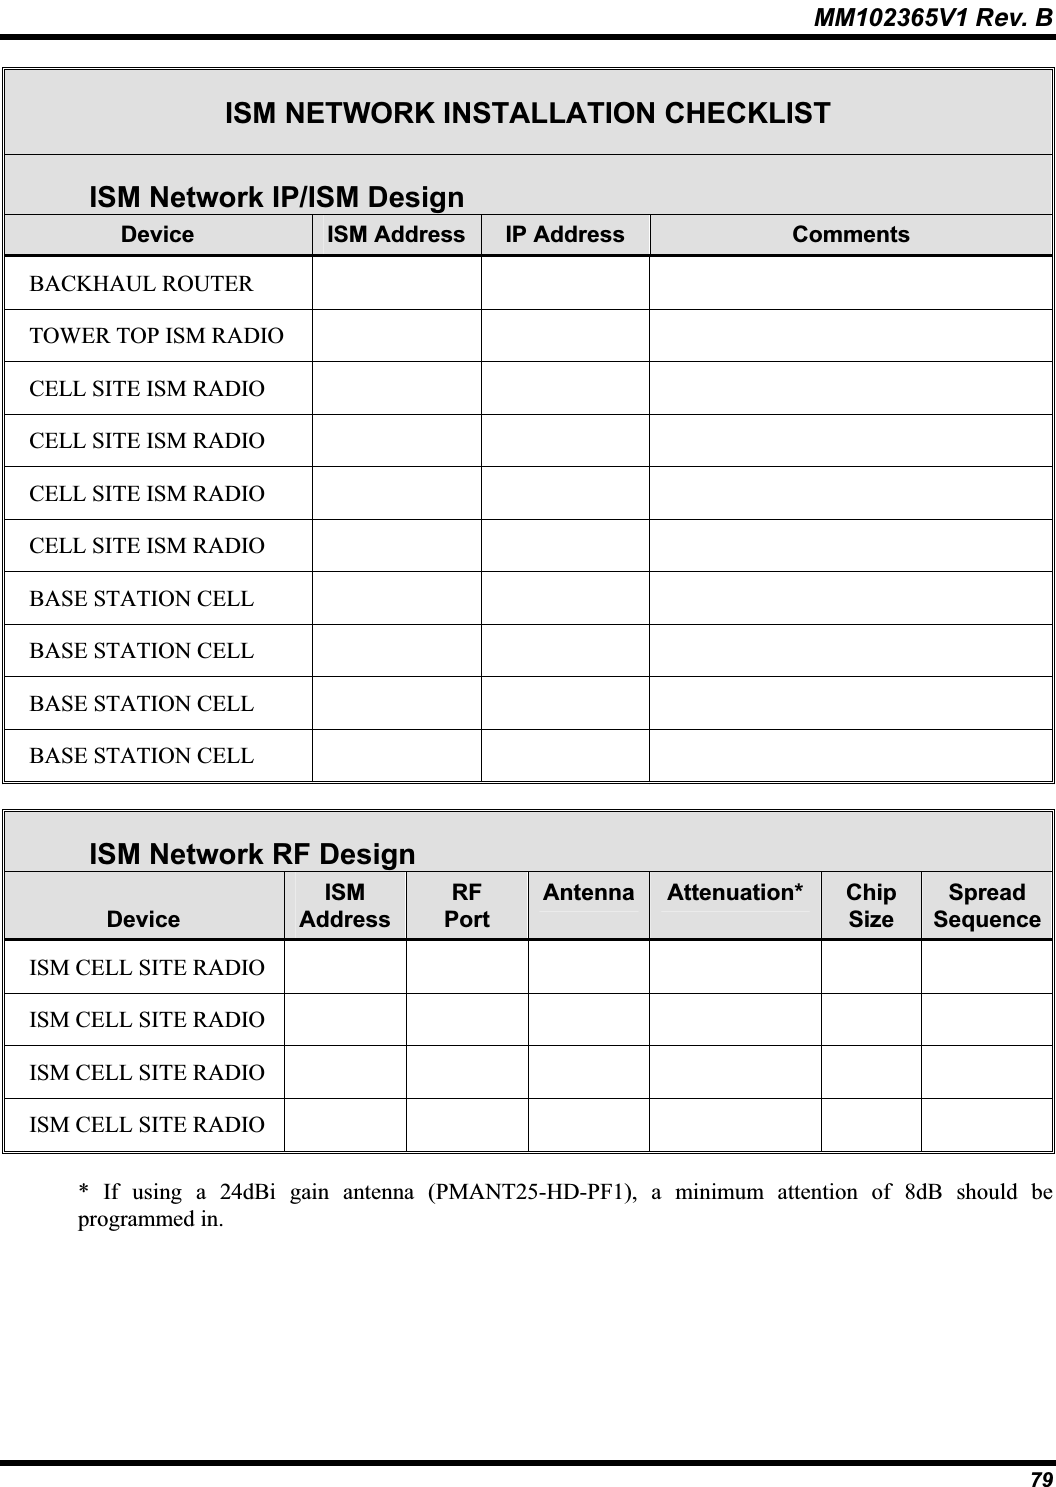 MM102365V1 Rev. B ISM NETWORK INSTALLATION CHECKLIST ISM Network IP/ISM DesignDevice ISM Address  IP Address  CommentsBACKHAUL ROUTER TOWER TOP ISM RADIO CELL SITE ISM RADIOCELL SITE ISM RADIO CELL SITE ISM RADIO CELL SITE ISM RADIO BASE STATION CELLBASE STATION CELLBASE STATION CELLBASE STATION CELLISM Network RF DesignDeviceISMAddressRFPortAntenna Attenuation* ChipSizeSpreadSequenceISM CELL SITE RADIO ISM CELL SITE RADIO ISM CELL SITE RADIO ISM CELL SITE RADIO * If using a 24dBi gain antenna (PMANT25-HD-PF1), a minimum attention of 8dB should be programmed in. 79